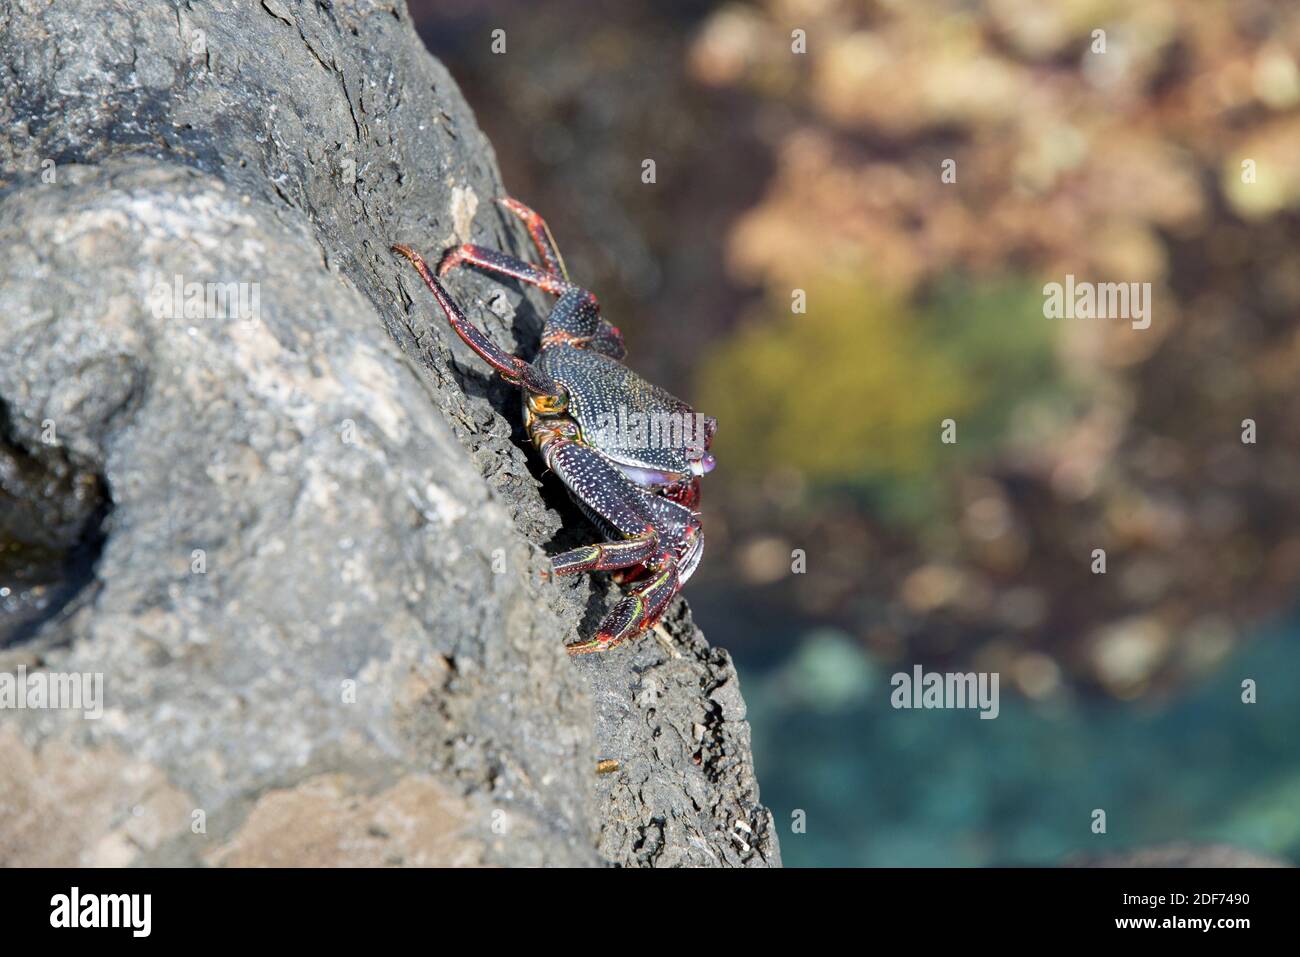 Cangrejo rojo (Grapsus adscensionis) is a crab native to Macaronesia Islands. This photo was taken in La Palma Island, Canary Islands, Spain. Stock Photo